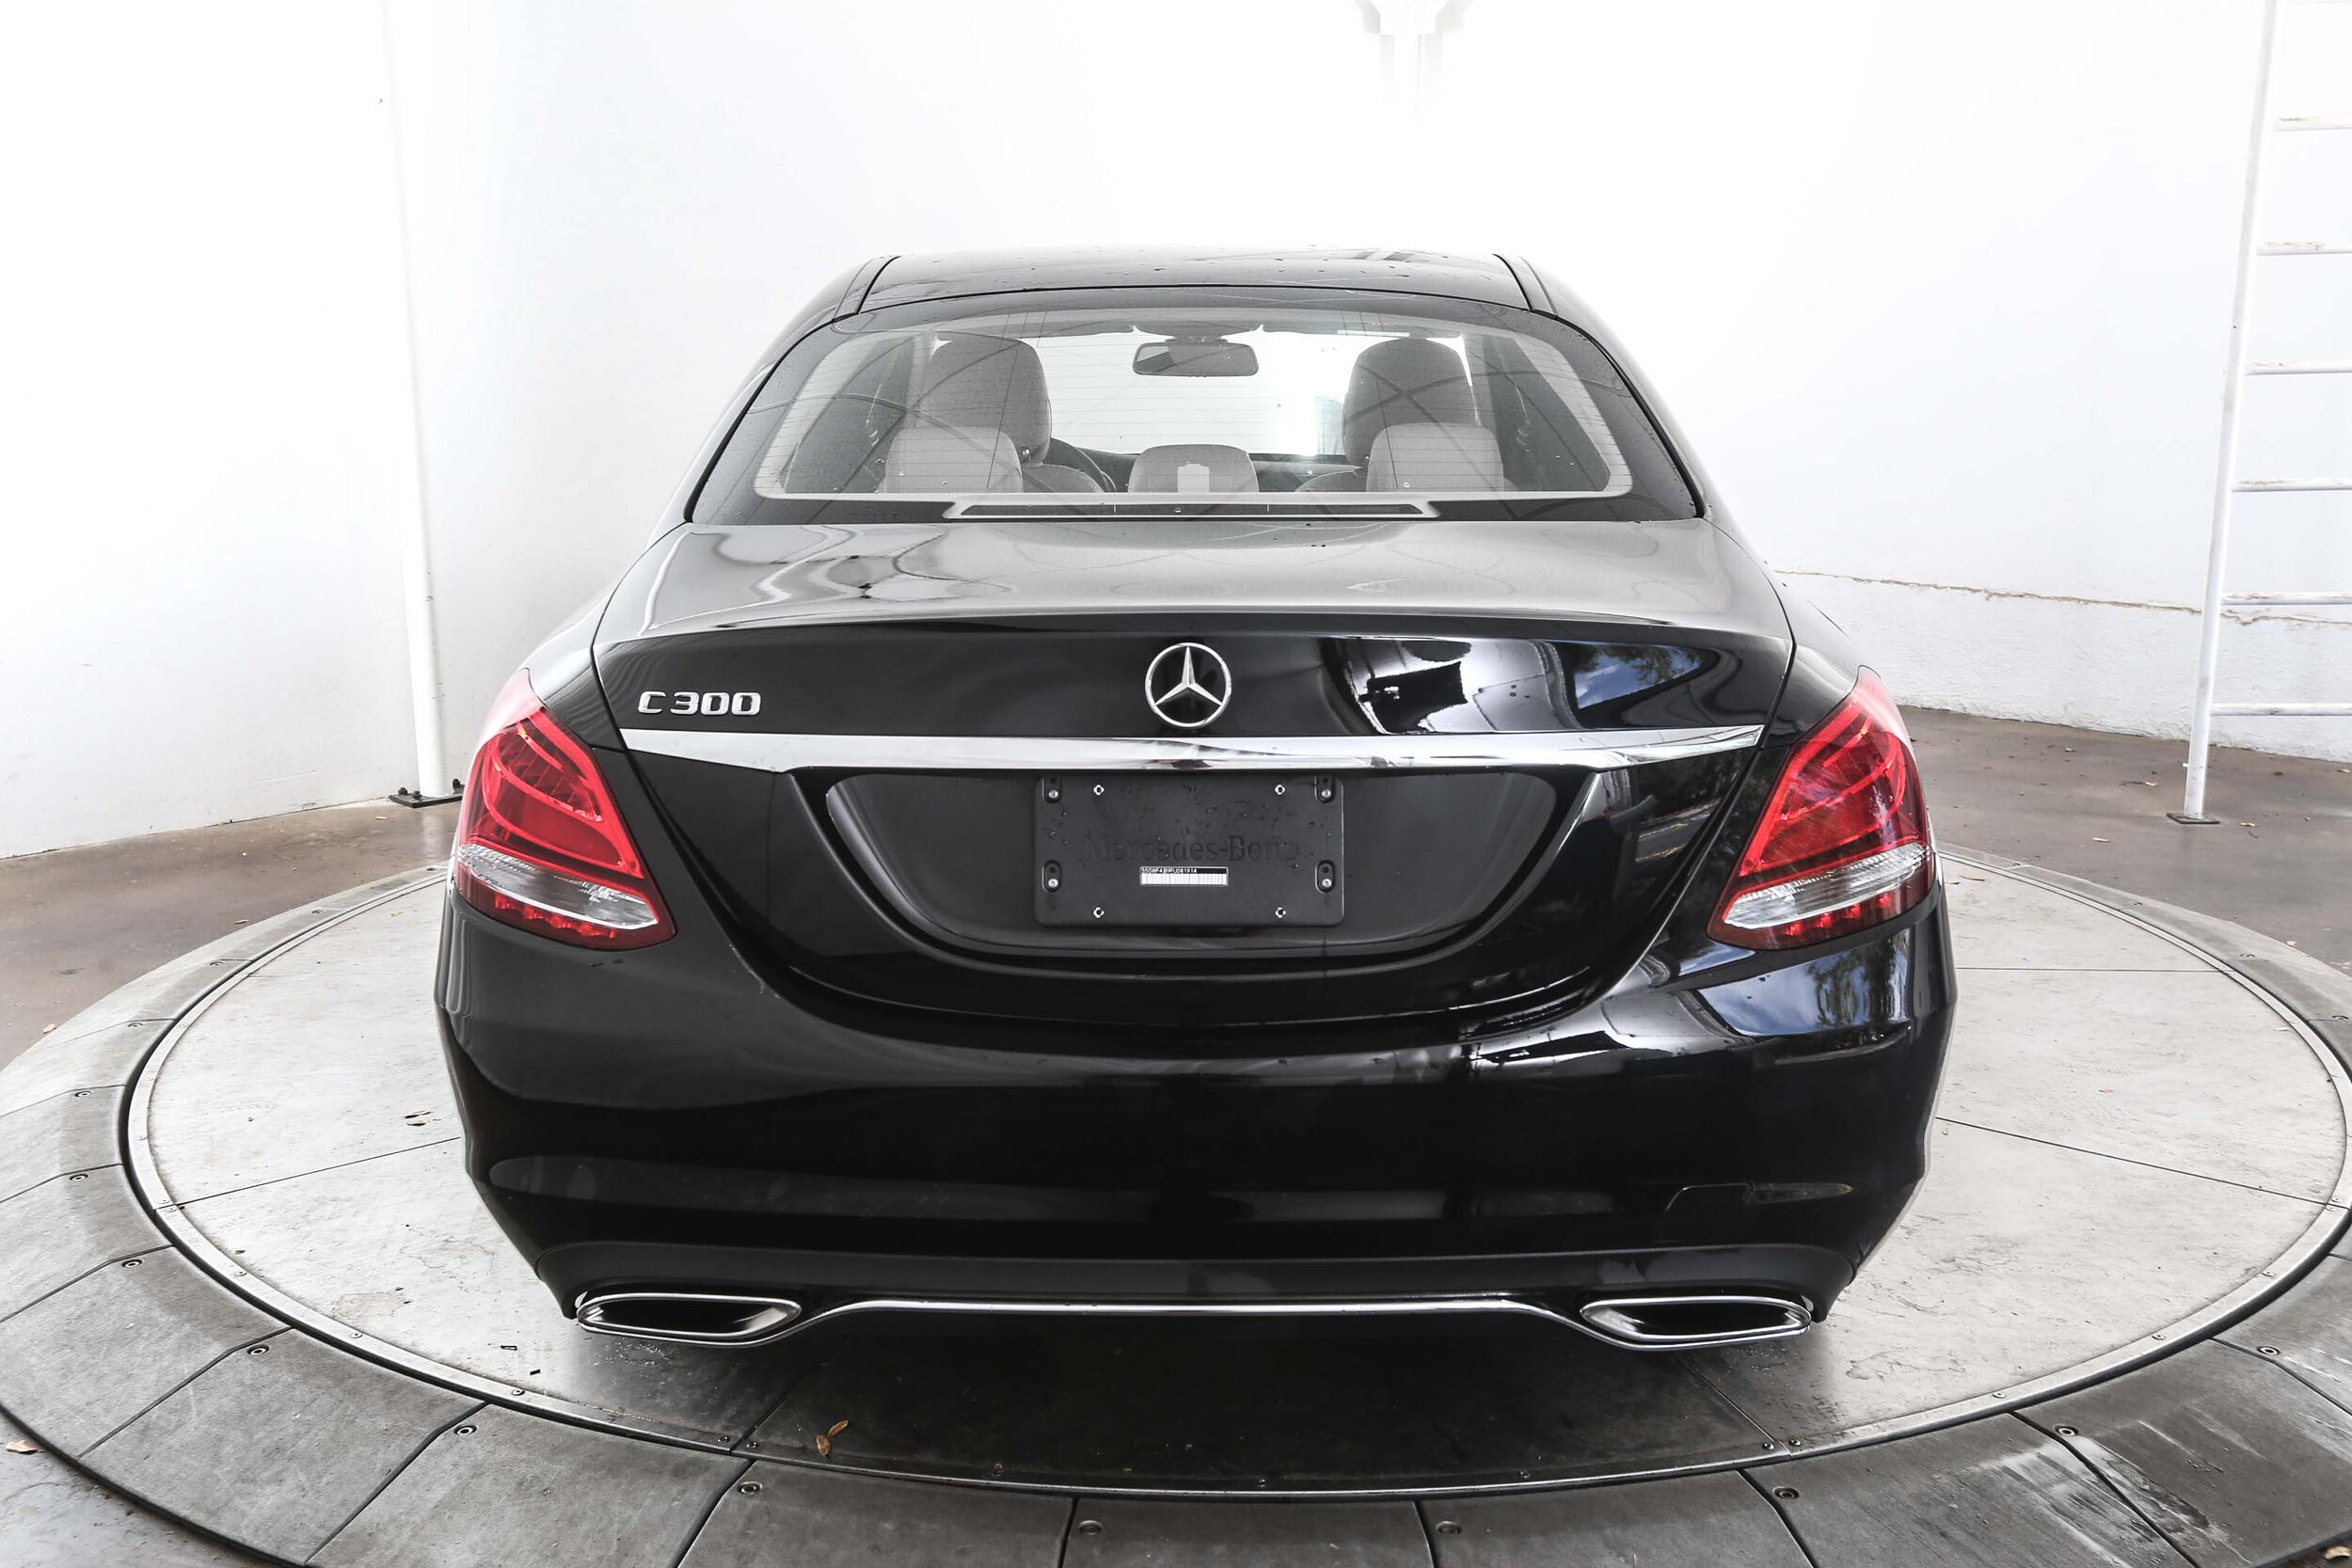 Used mercedes for sale in austin texas